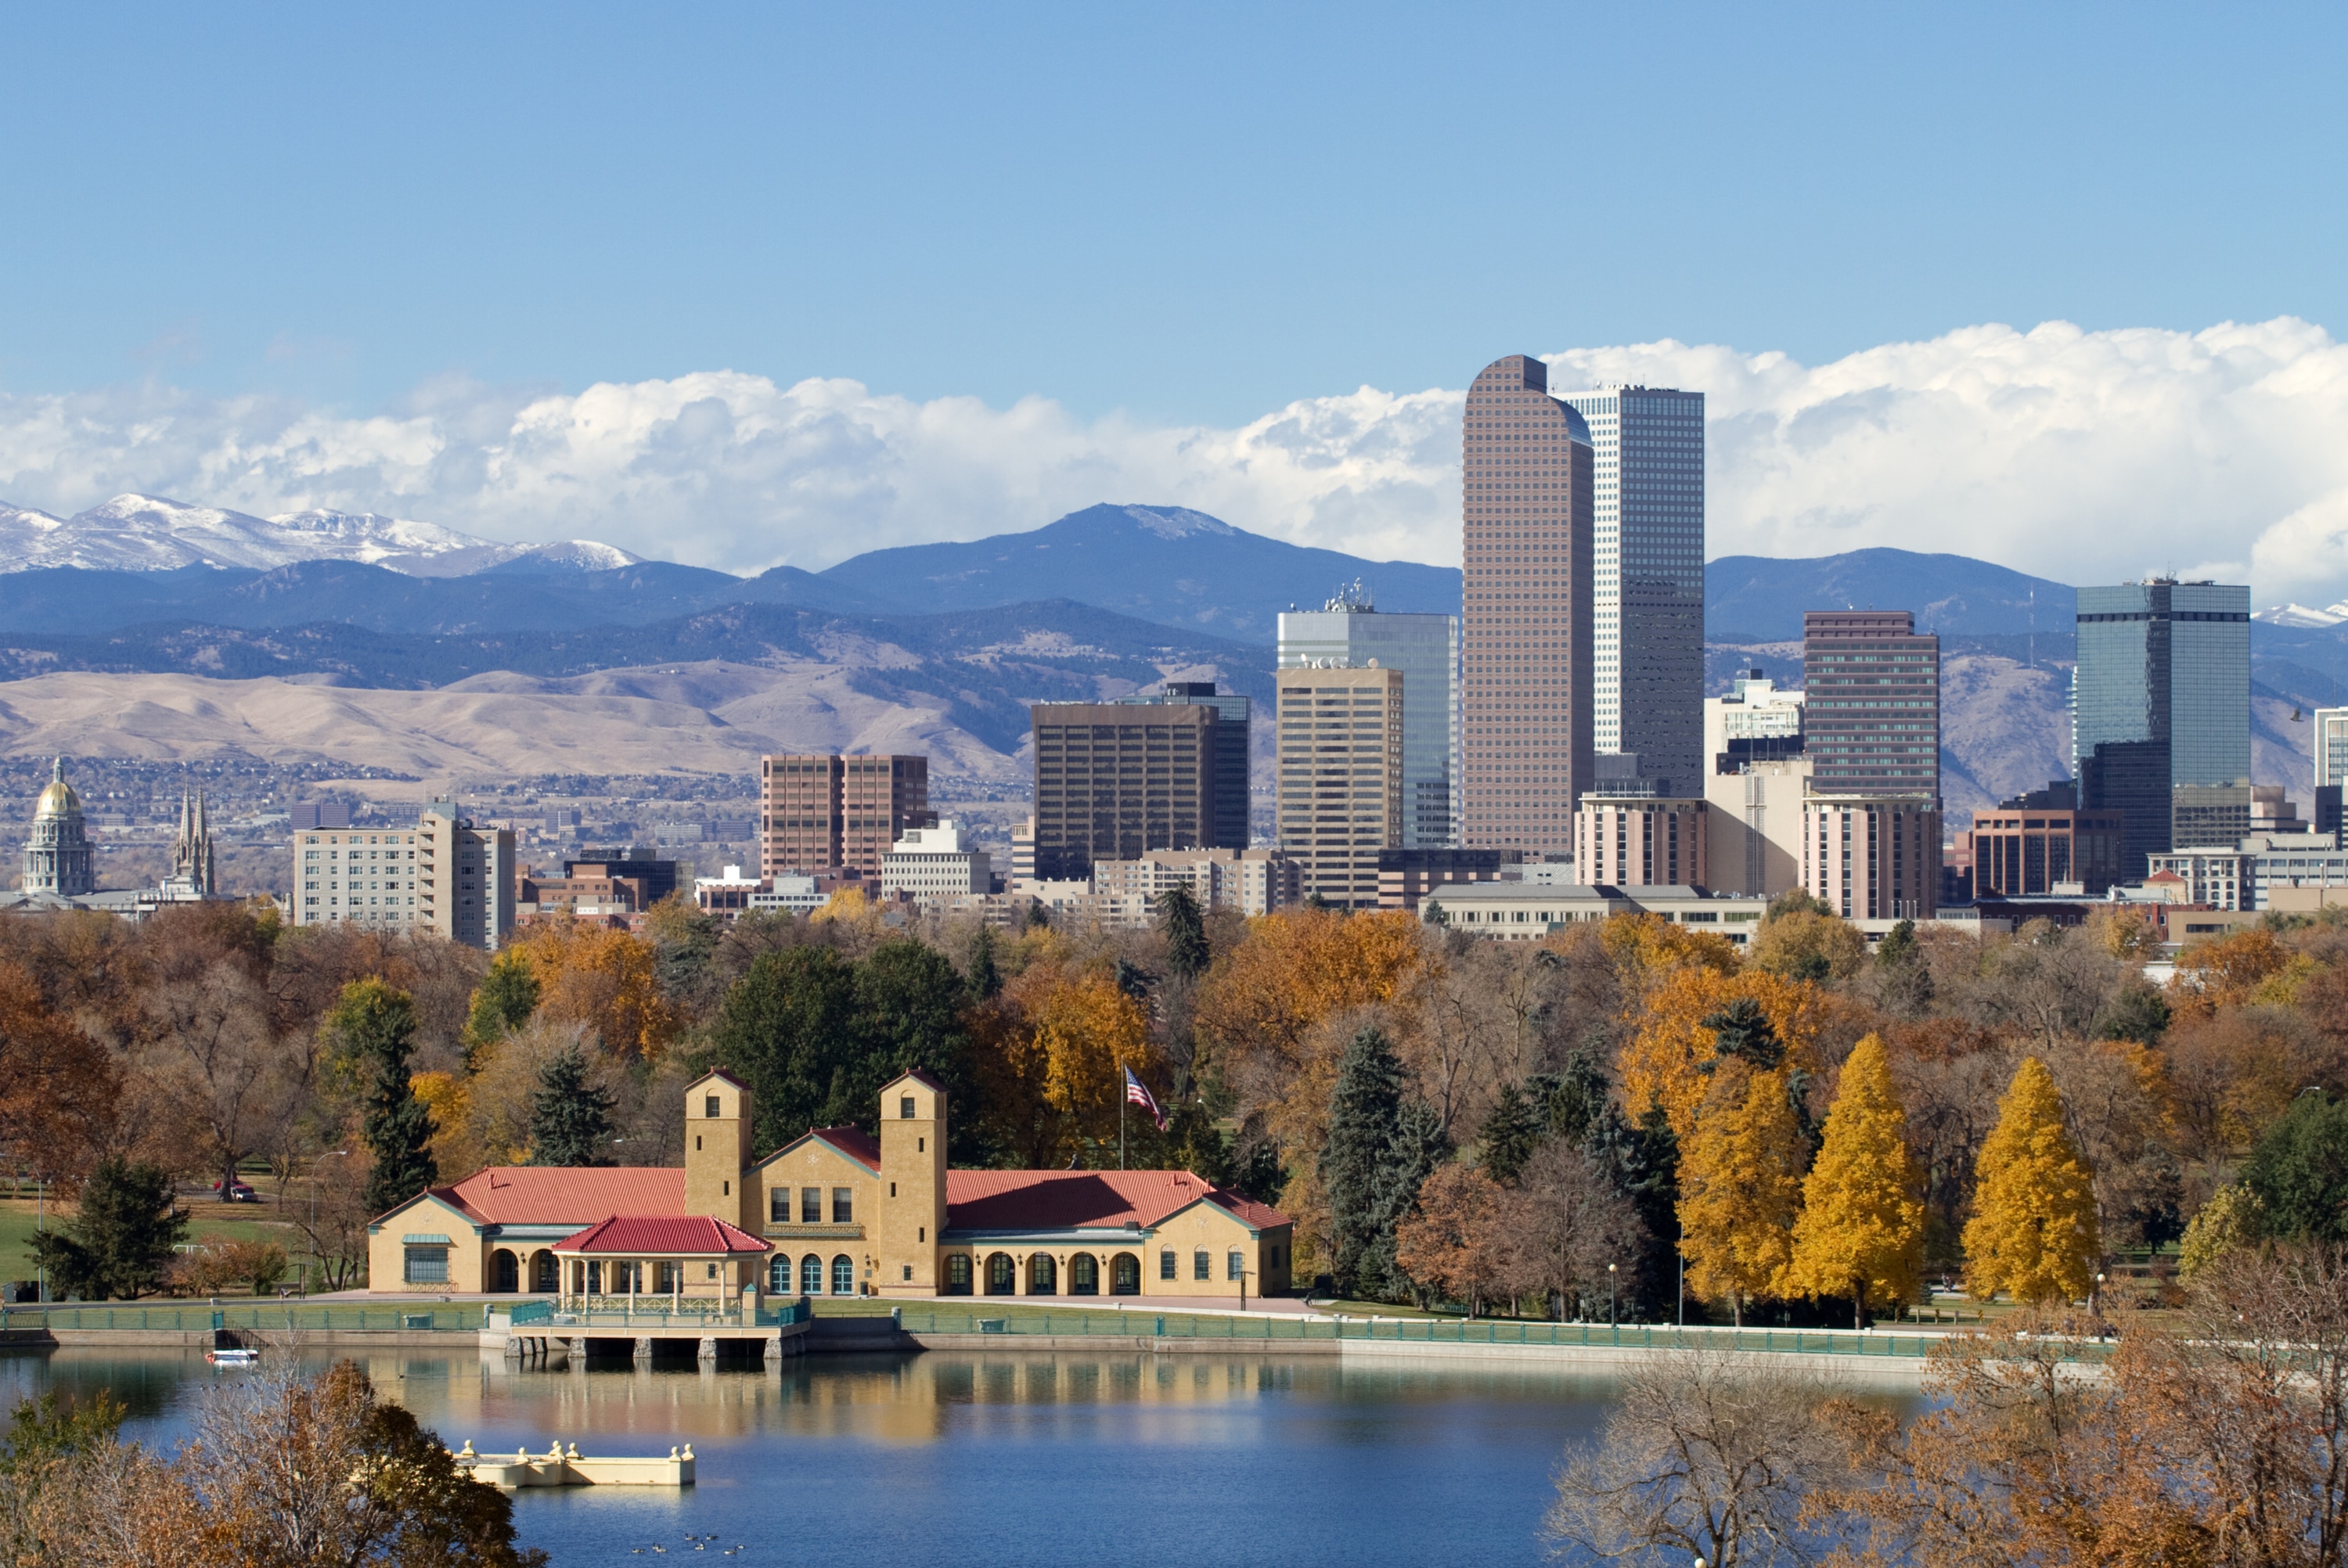 42 Fun & Cheap Things to Do and See in Denver, CO